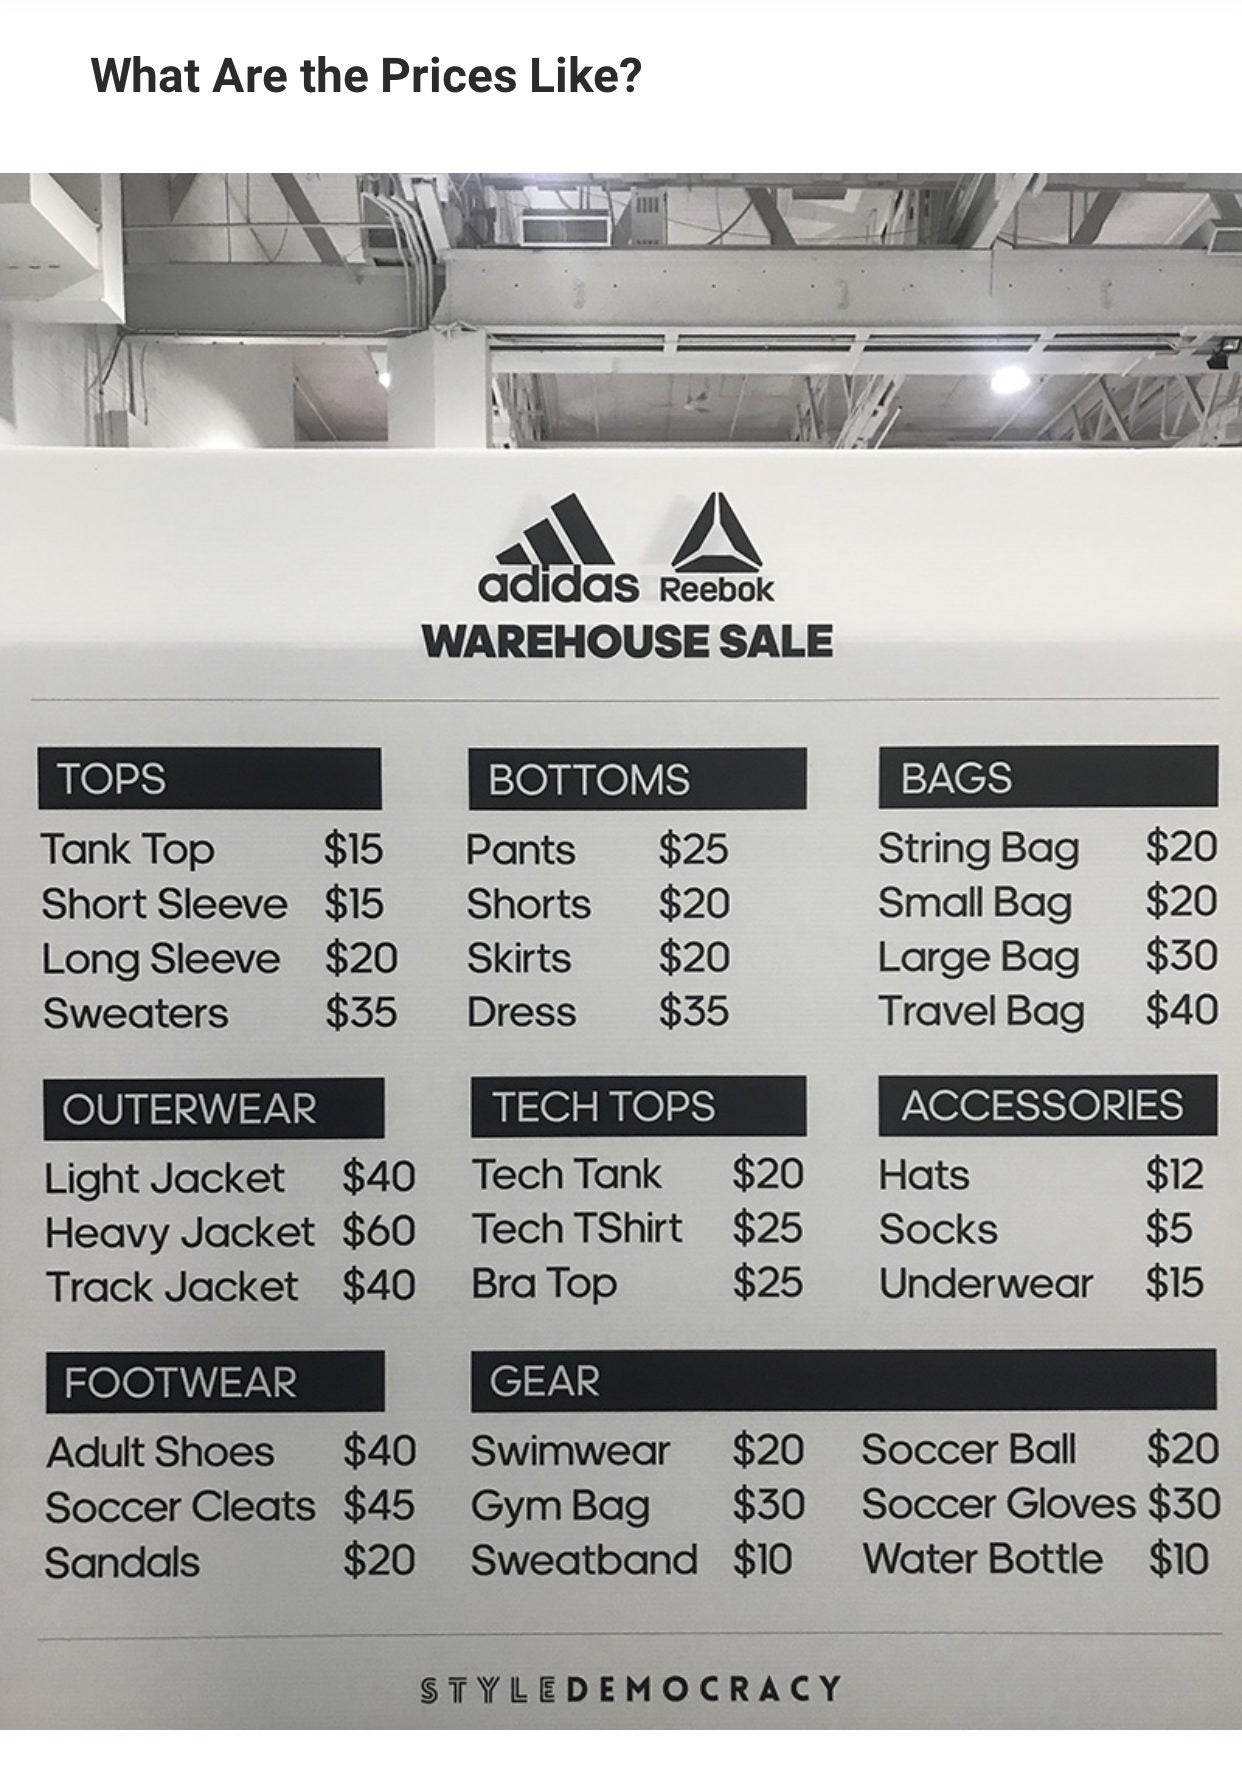 Amex Front of the line Sep 24] Adidas & Reebok Warehouse DAY - RedFlagDeals.com